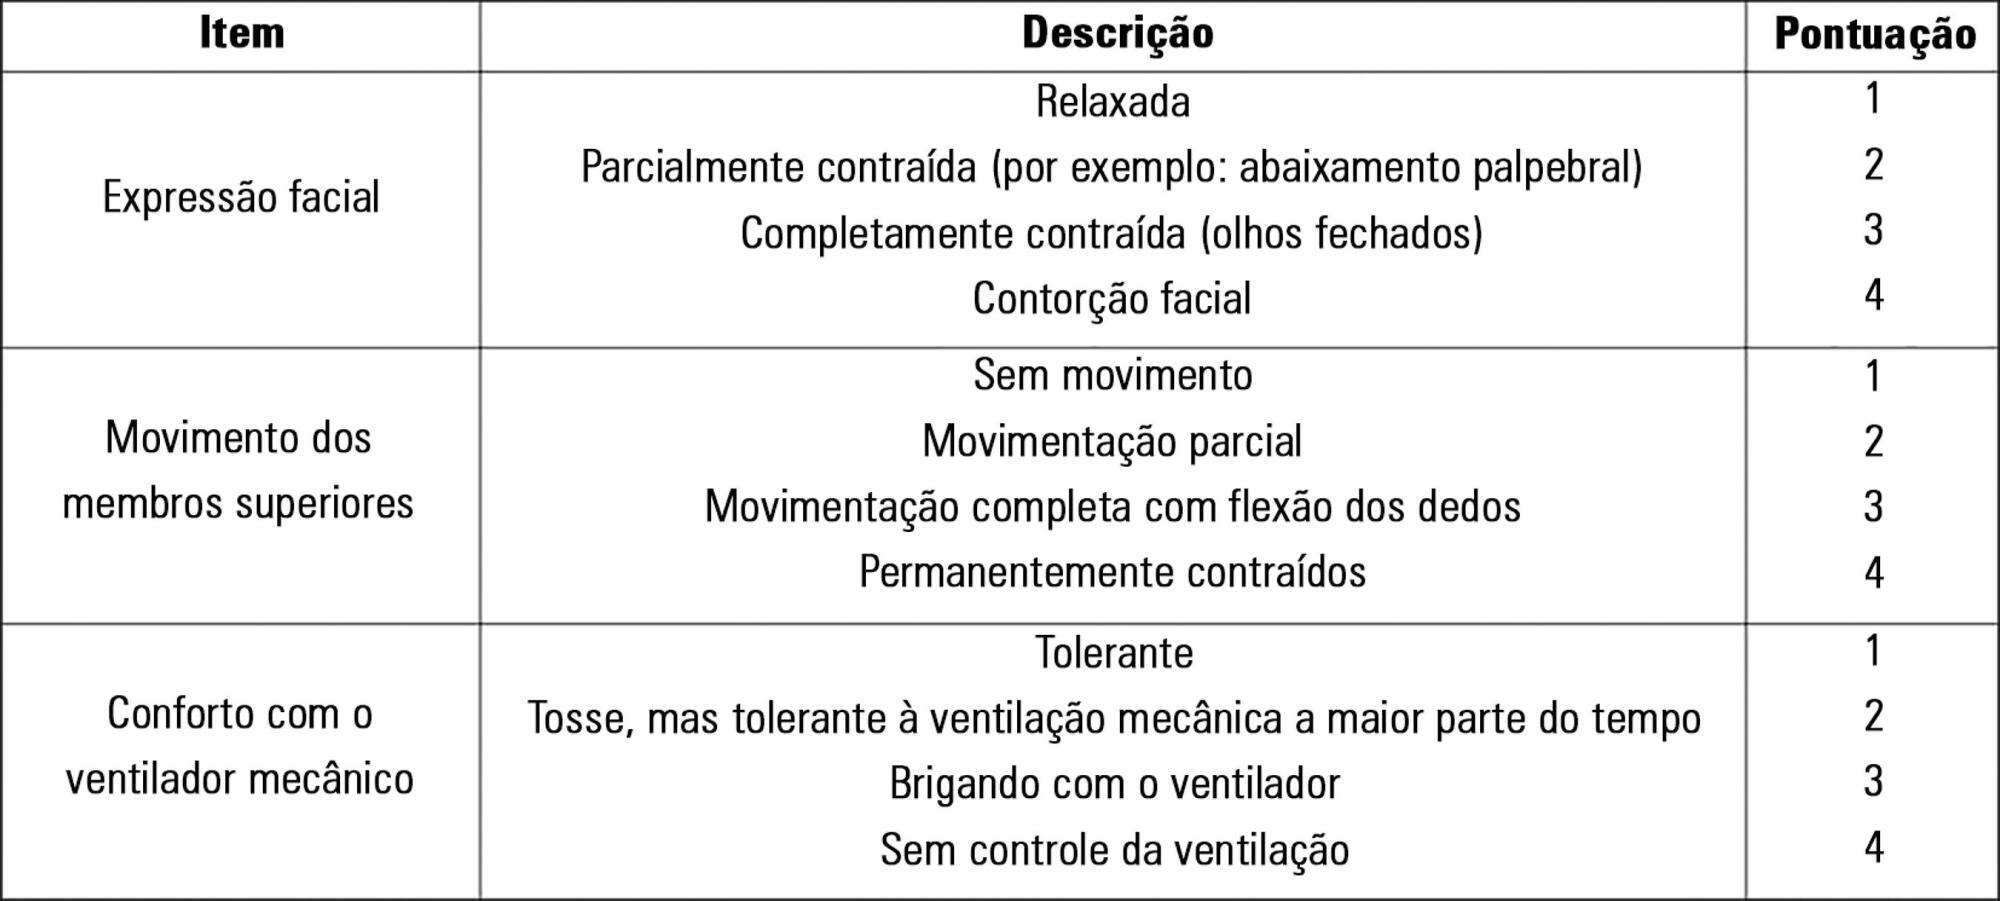 Pain assessment of traumatic brain injury victims using the Brazilian version of the Behavioral Pain Scale